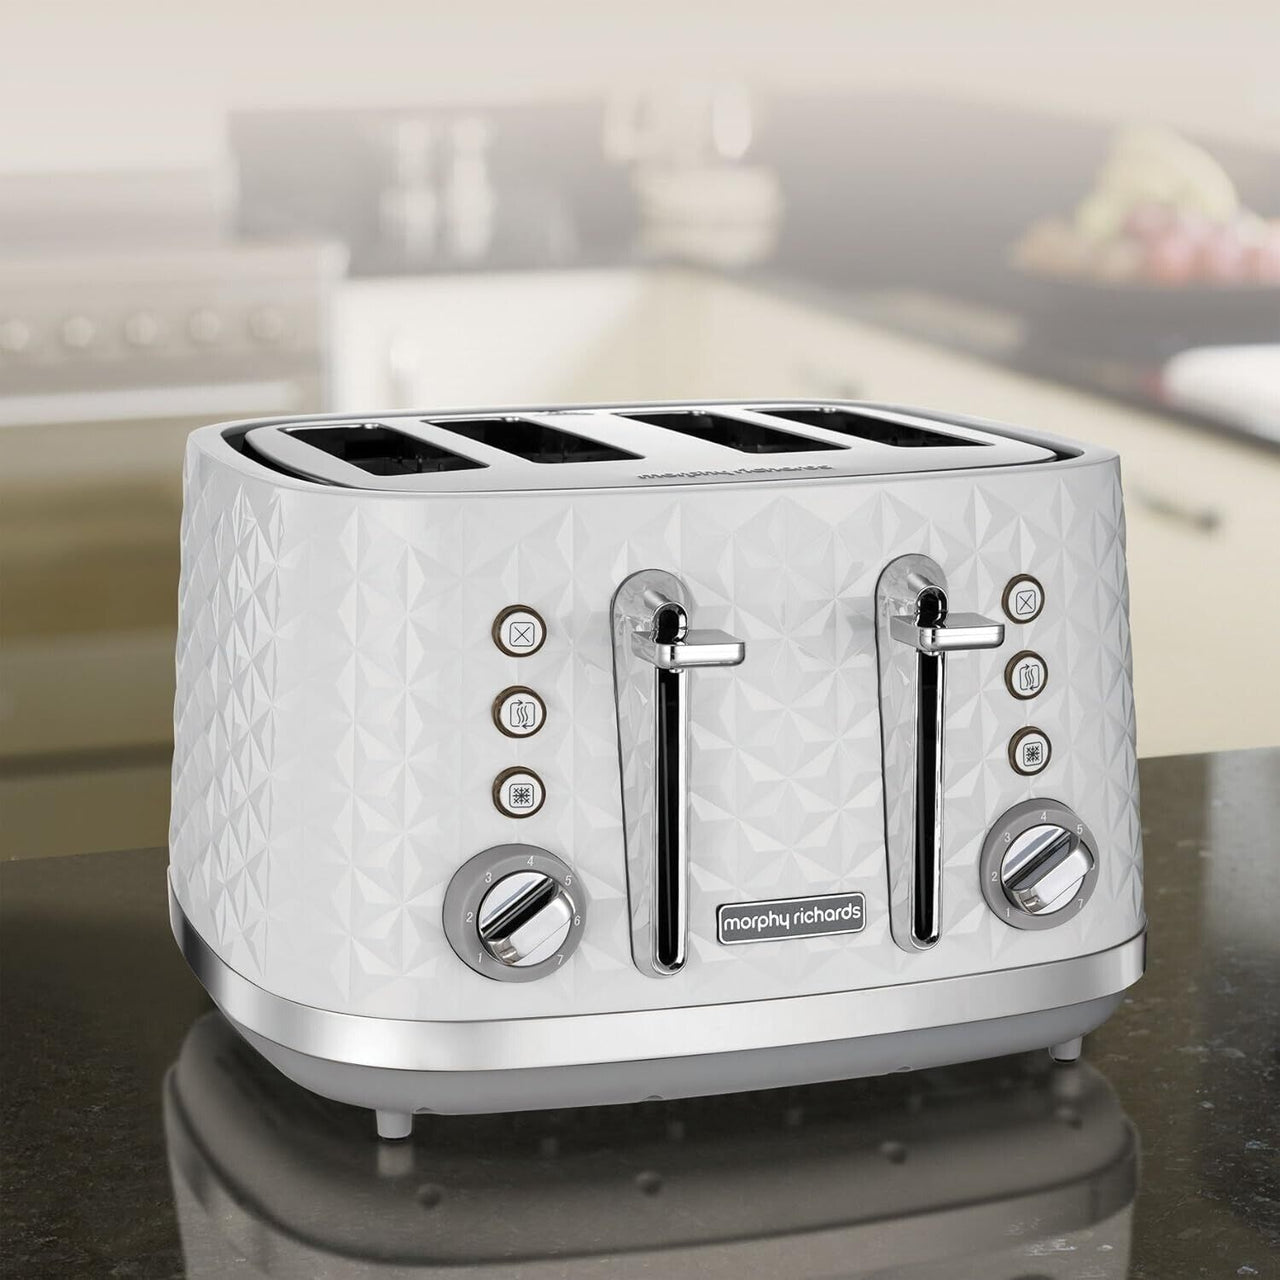 Morphy Richards Vector 4 Slice Toaster in White with Patterned 3D Finish 248134